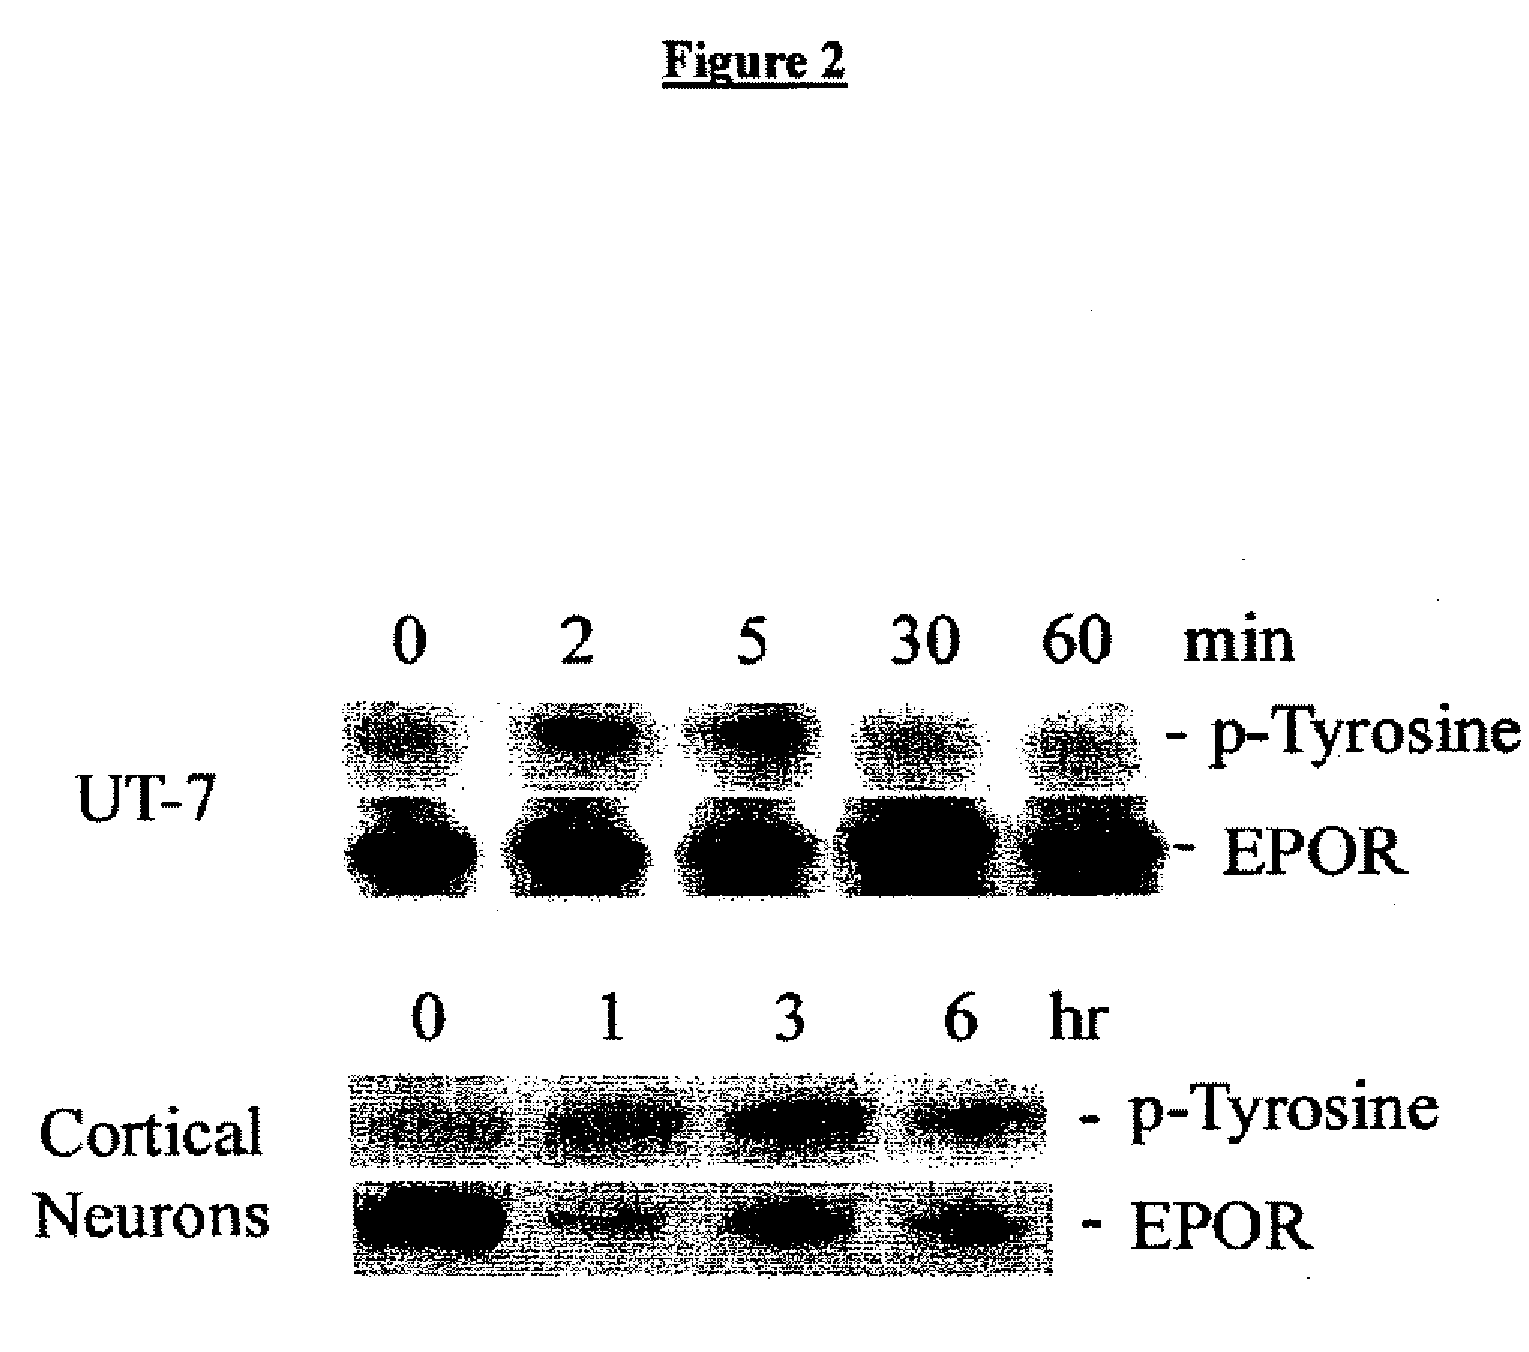 Methods for shp1 mediated neuroprotection